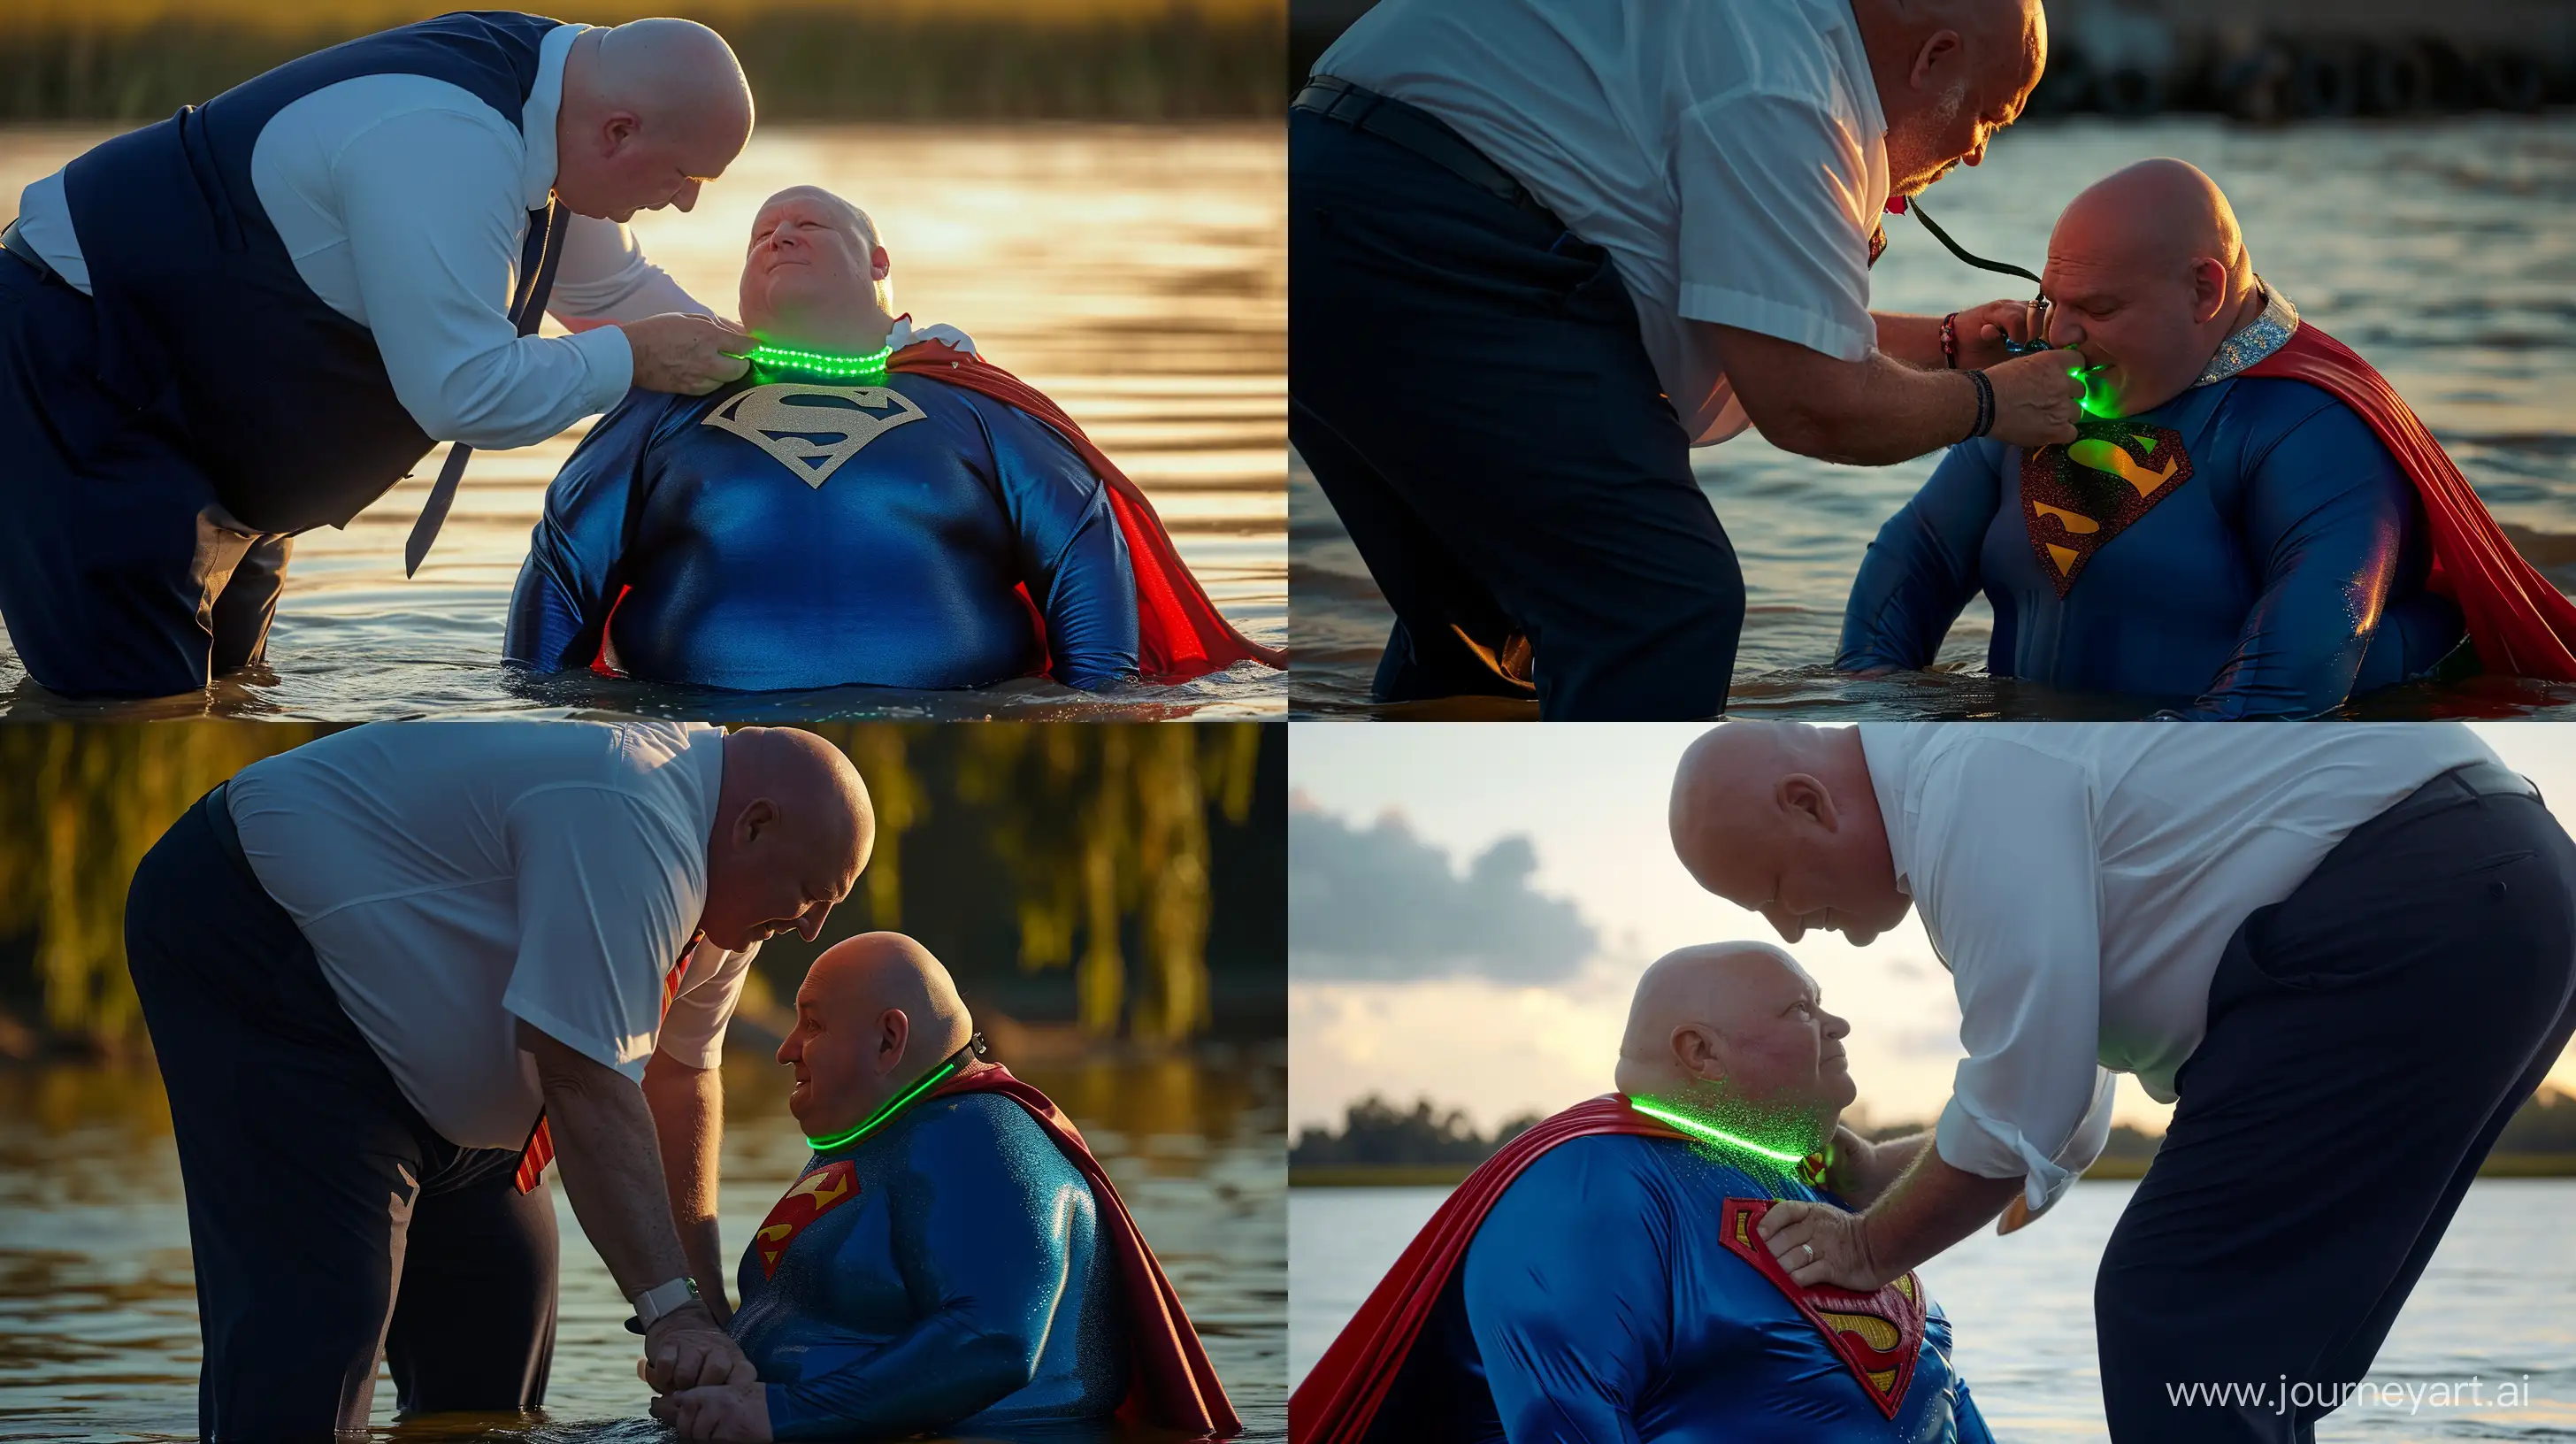 Elderly-Mens-Playful-Water-Adventure-with-Glowing-Dog-Collar-and-Superman-Costume